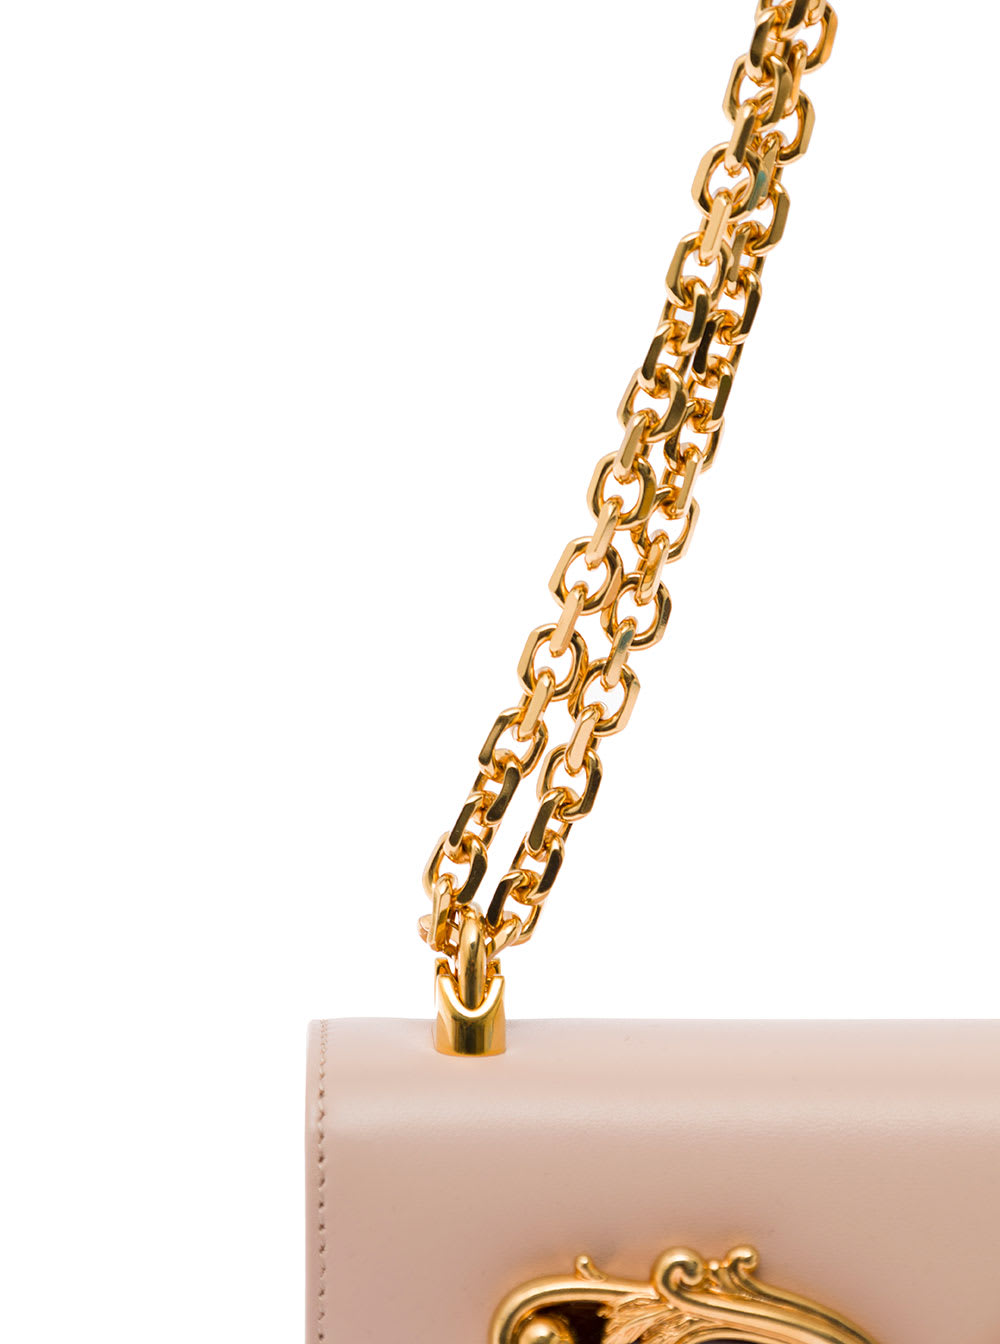 Shop Dolce & Gabbana Pink Barocco Ccrossbody Bag With Chain Shoulder Strap And Monogram Plate On The Front Dolce & Gabban